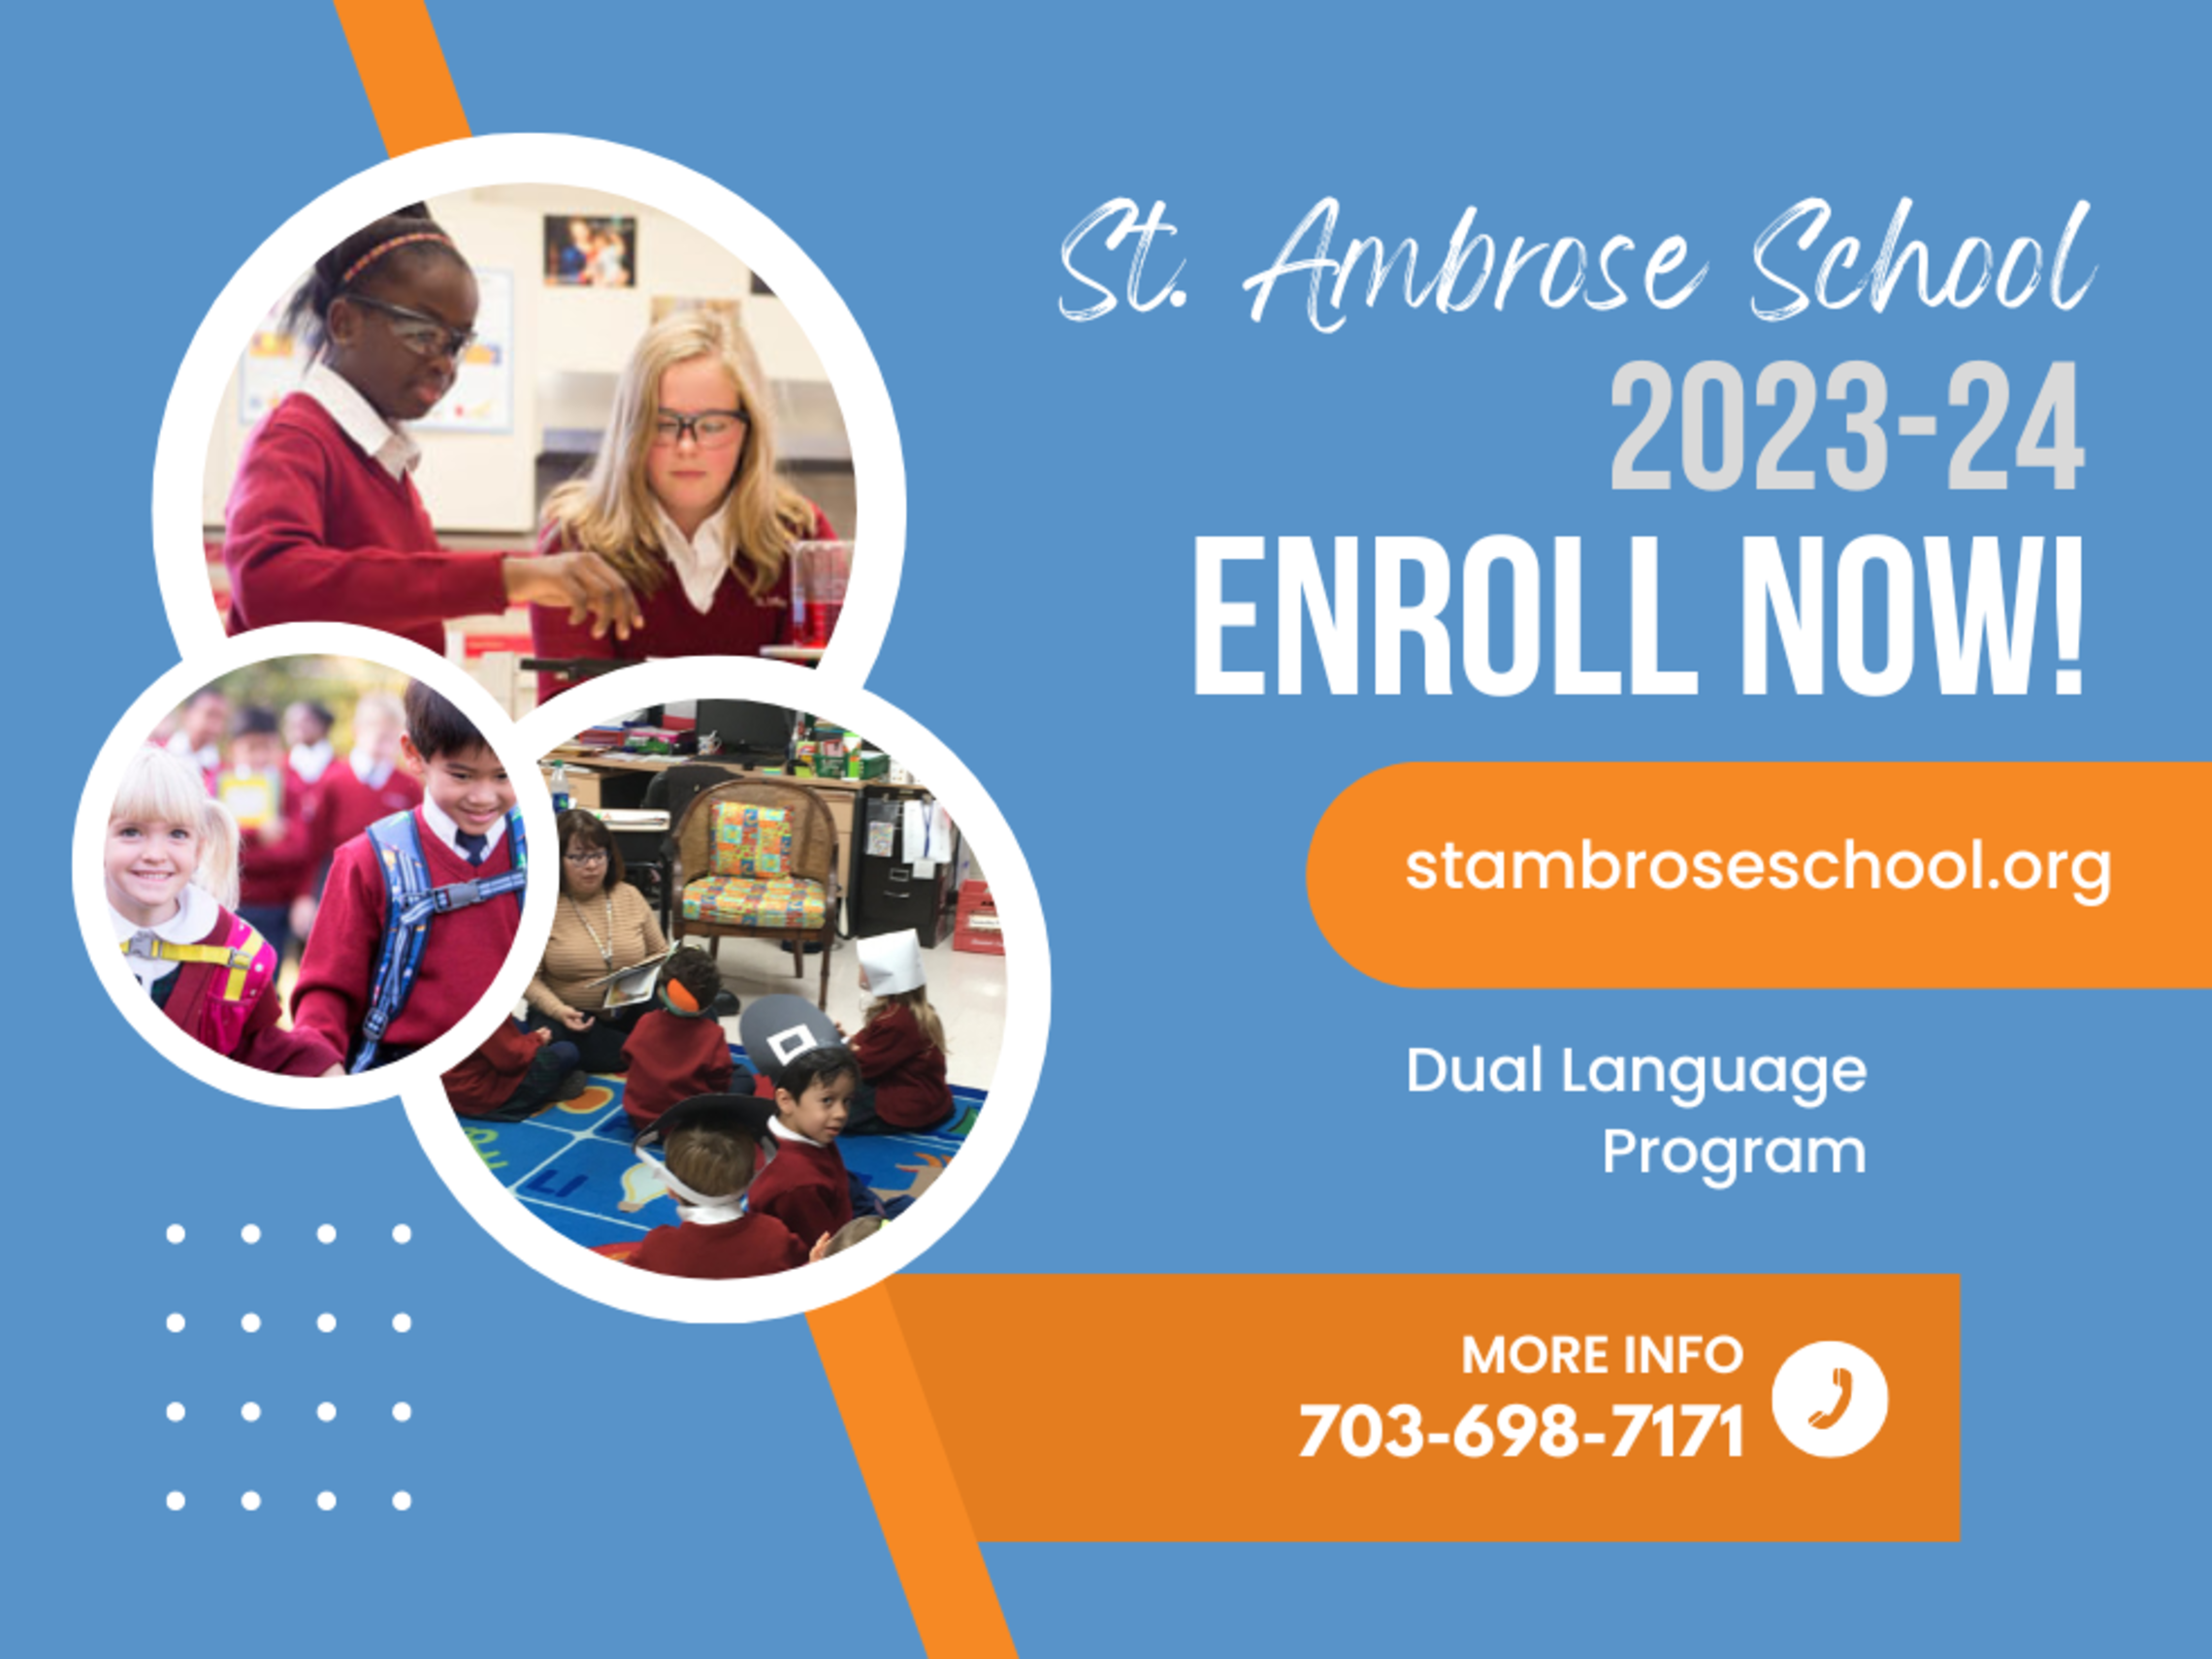 Image.staschoolenrollnow.march2023